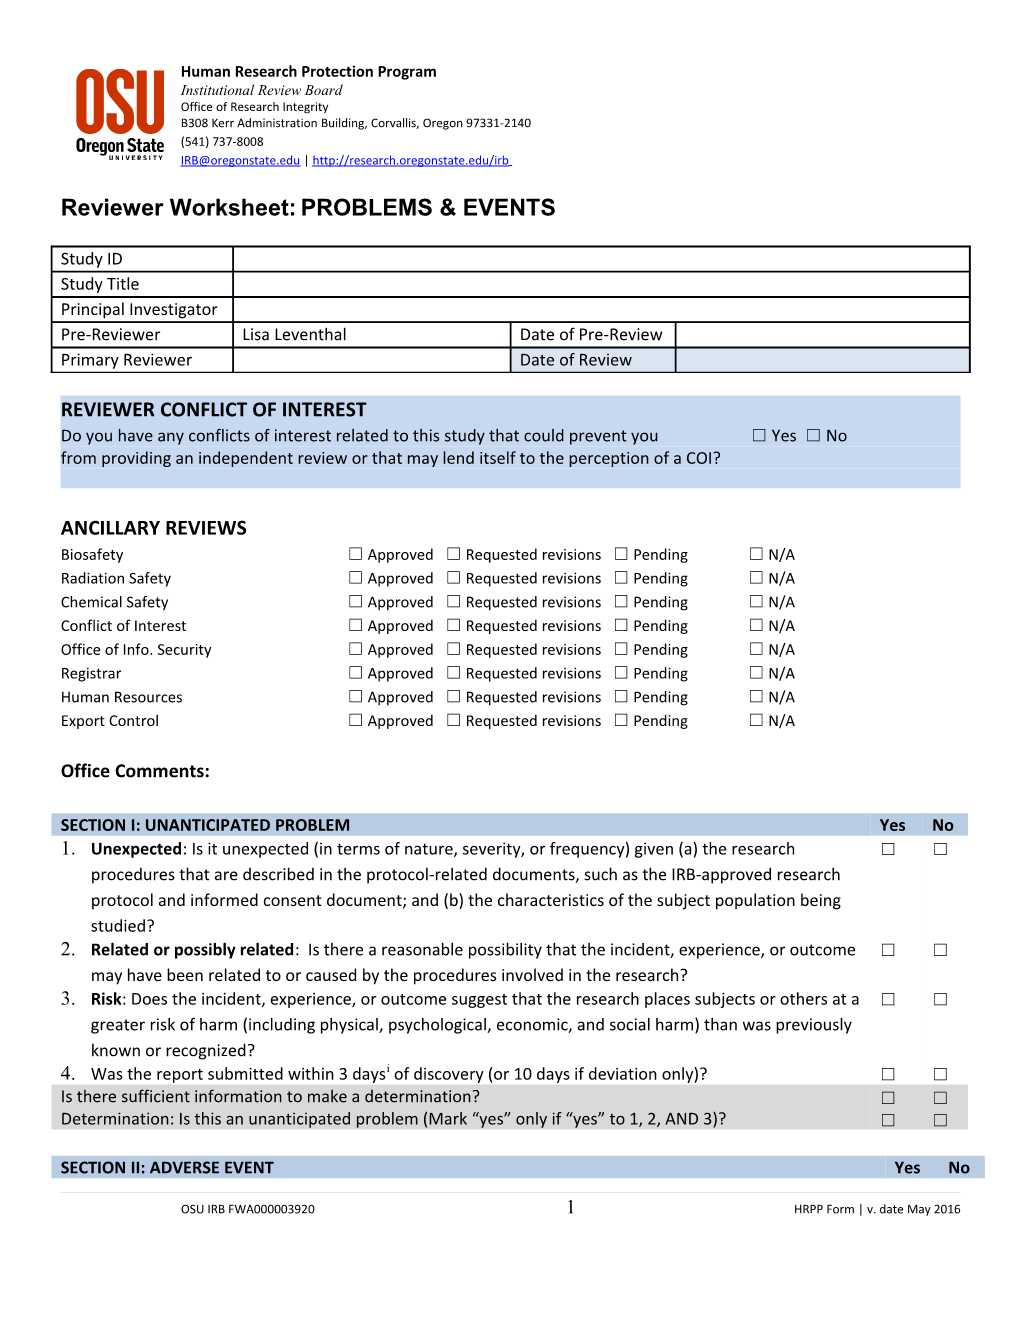 Reviewer Worksheet:PROBLEMS & EVENTS